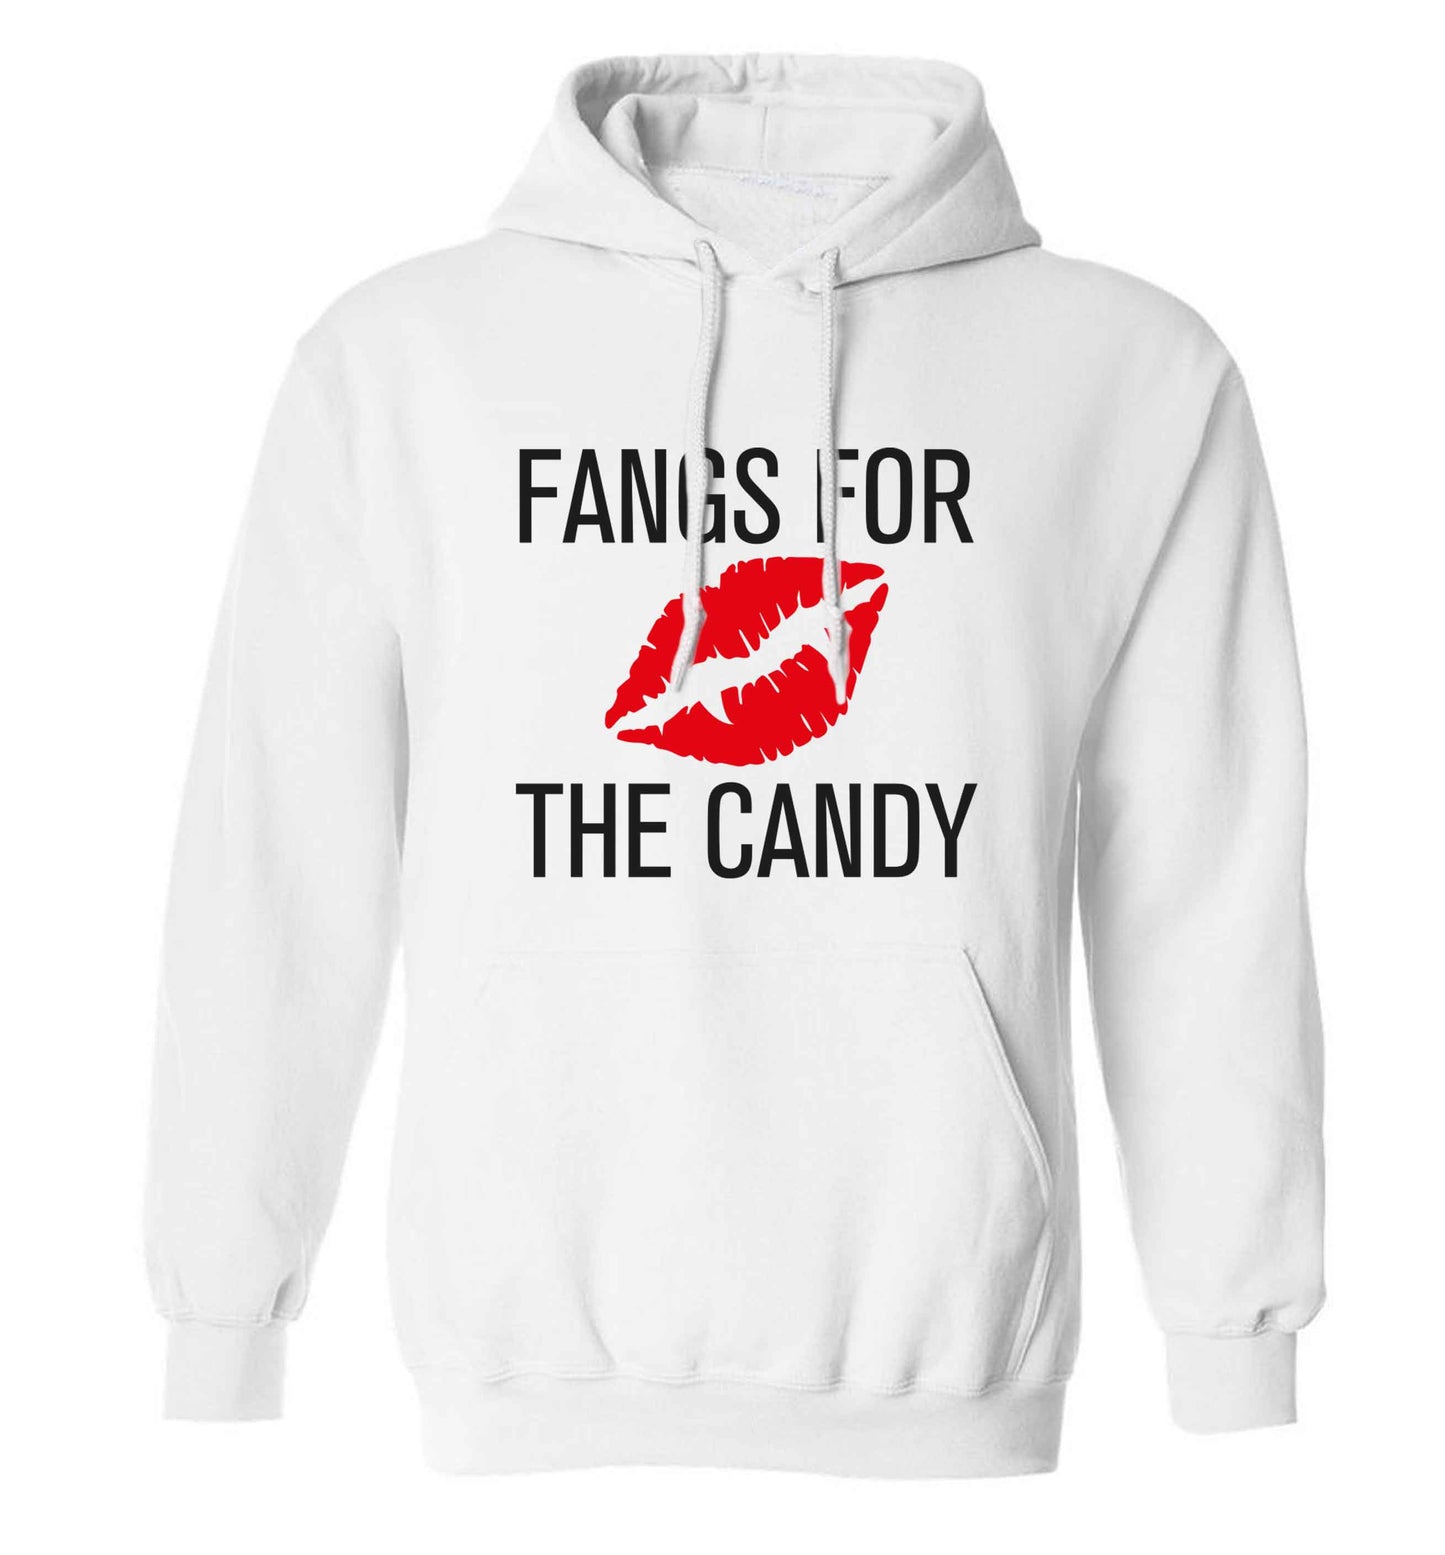 Fangs for the candy adults unisex white hoodie 2XL